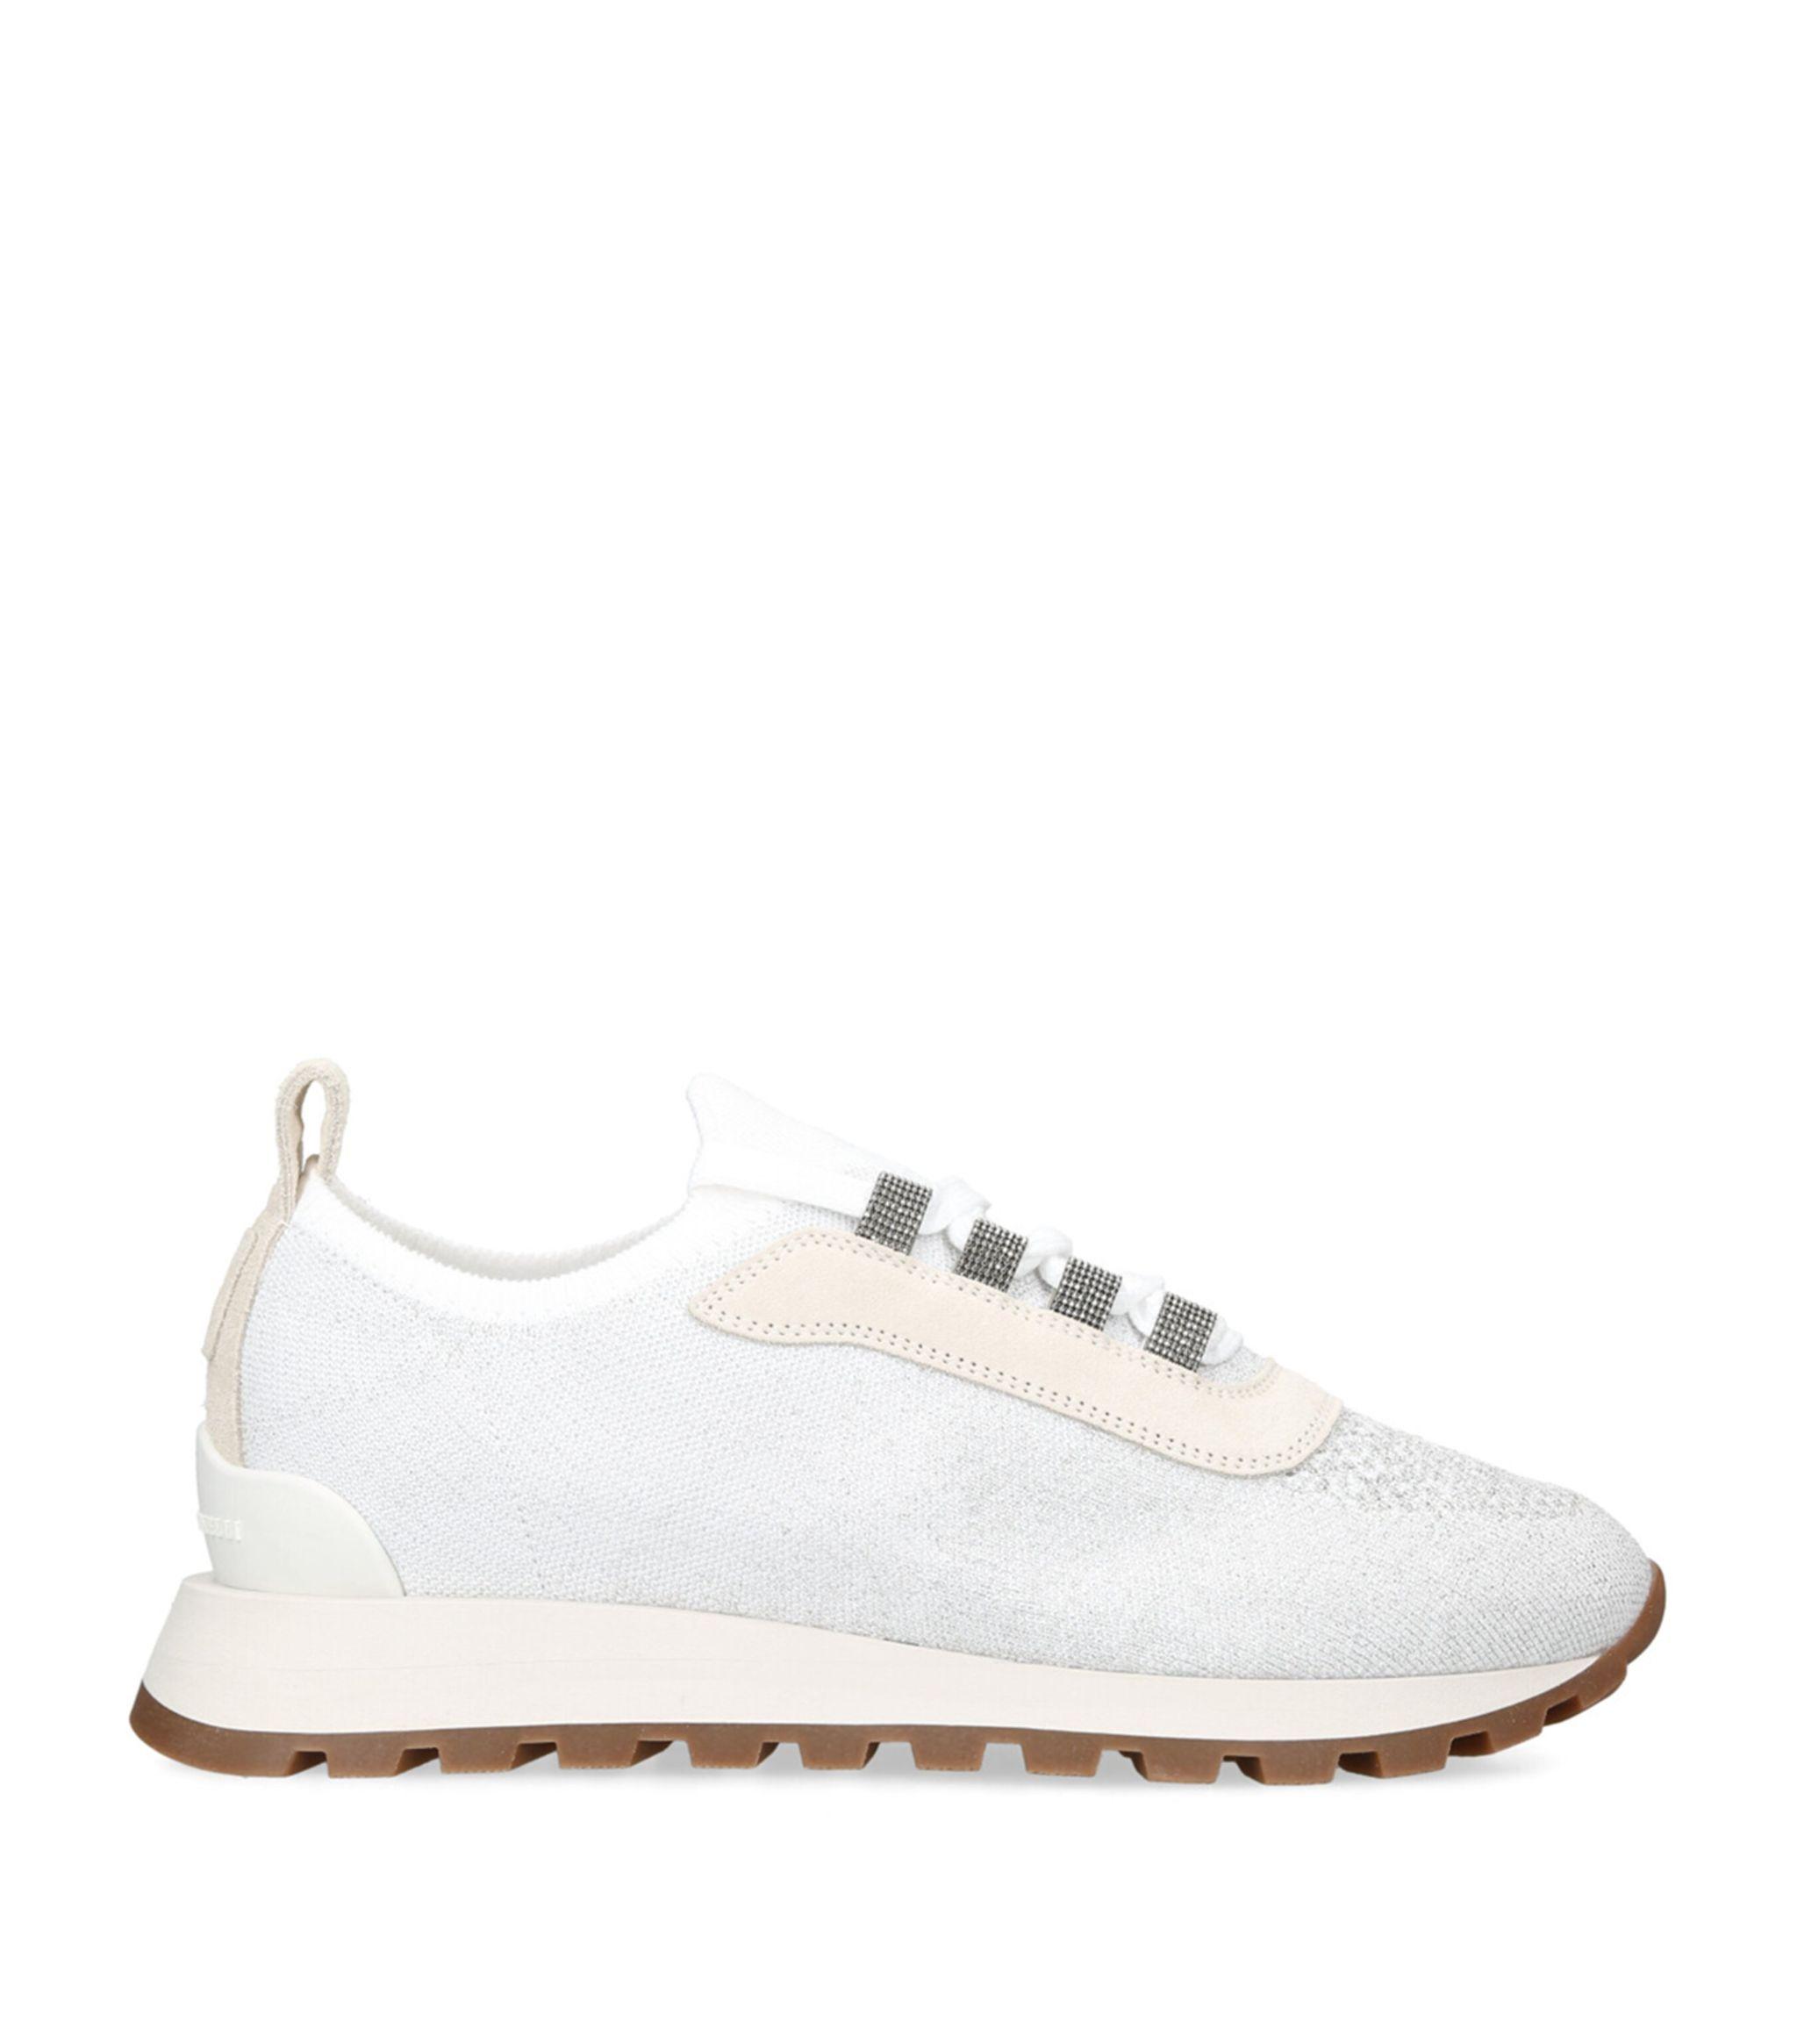 Brunello Cucinelli Embellished Monili Sneakers in White | Lyst